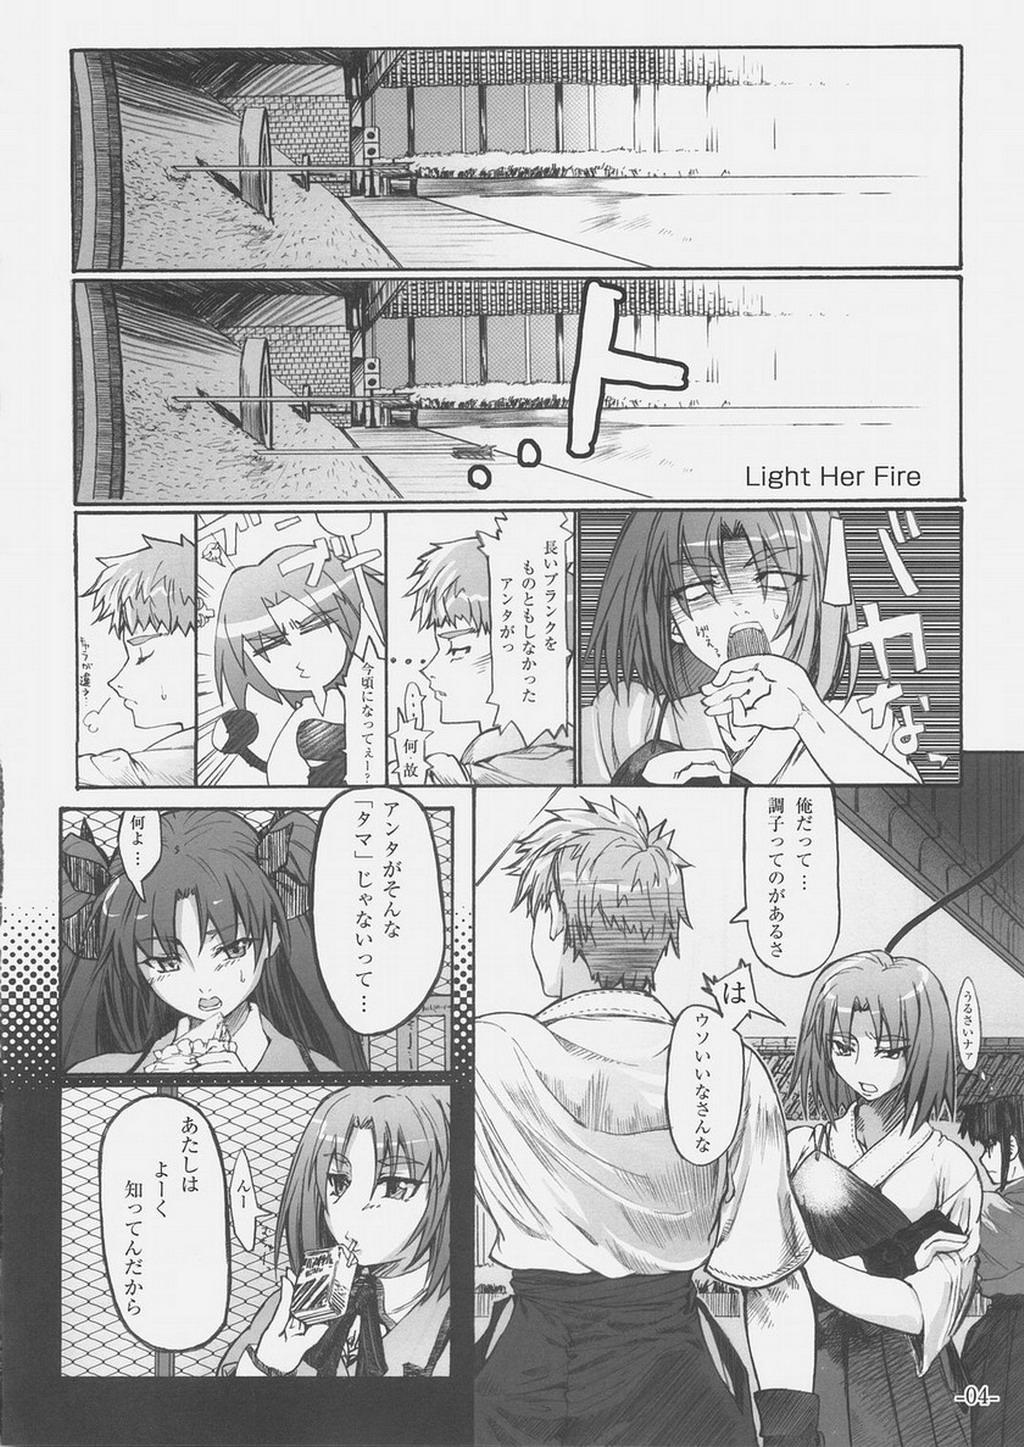 Full Light Her Fire! - Fate stay night Spanish - Page 3